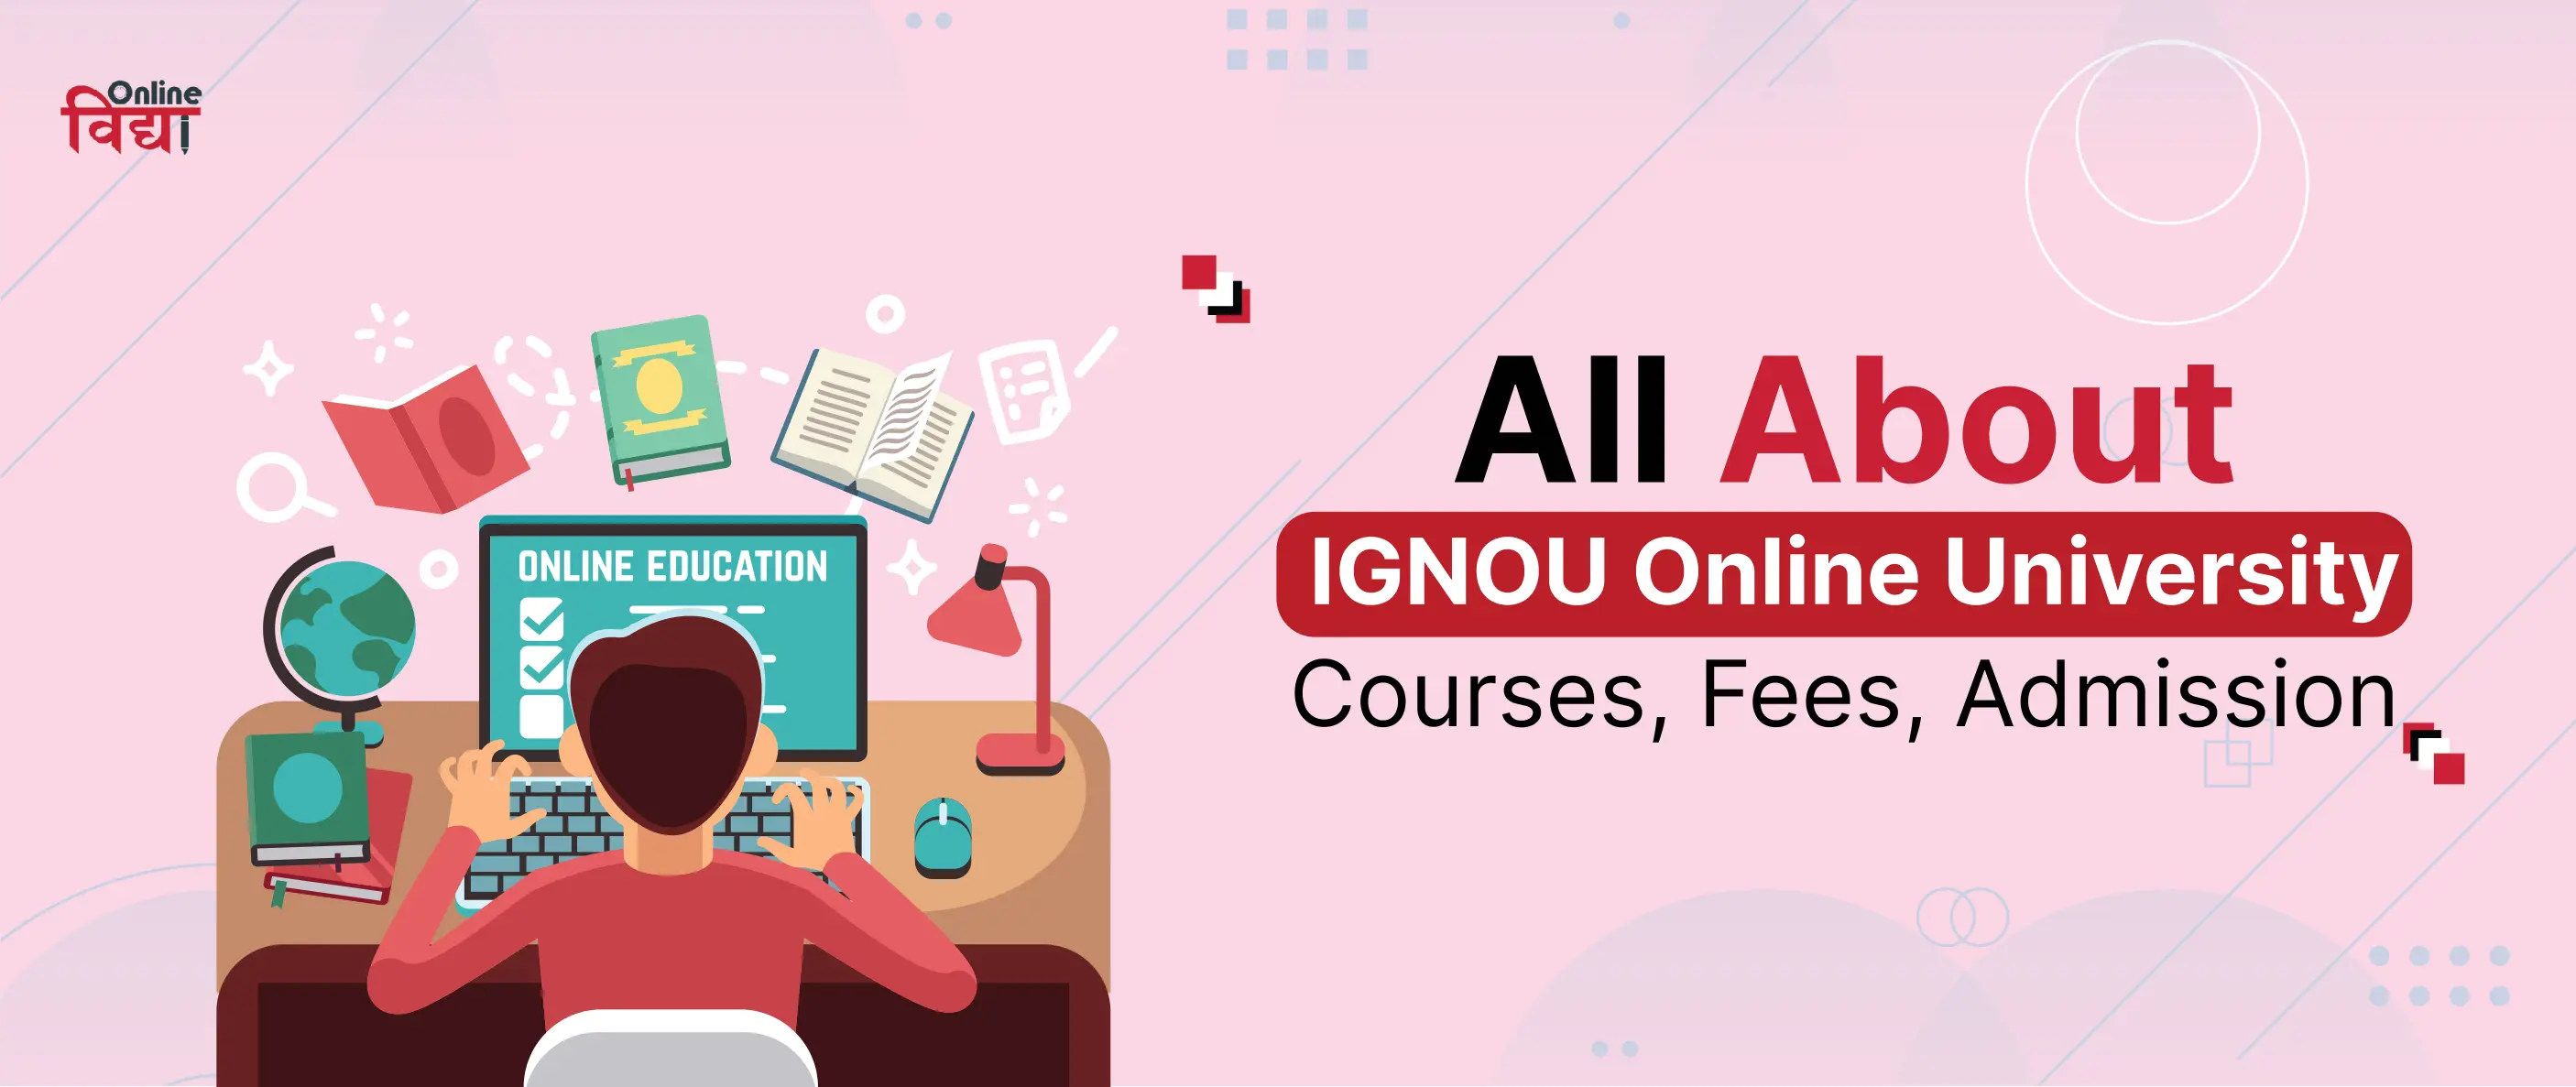 All about IGNOU Online University- Courses, Fees, Admission